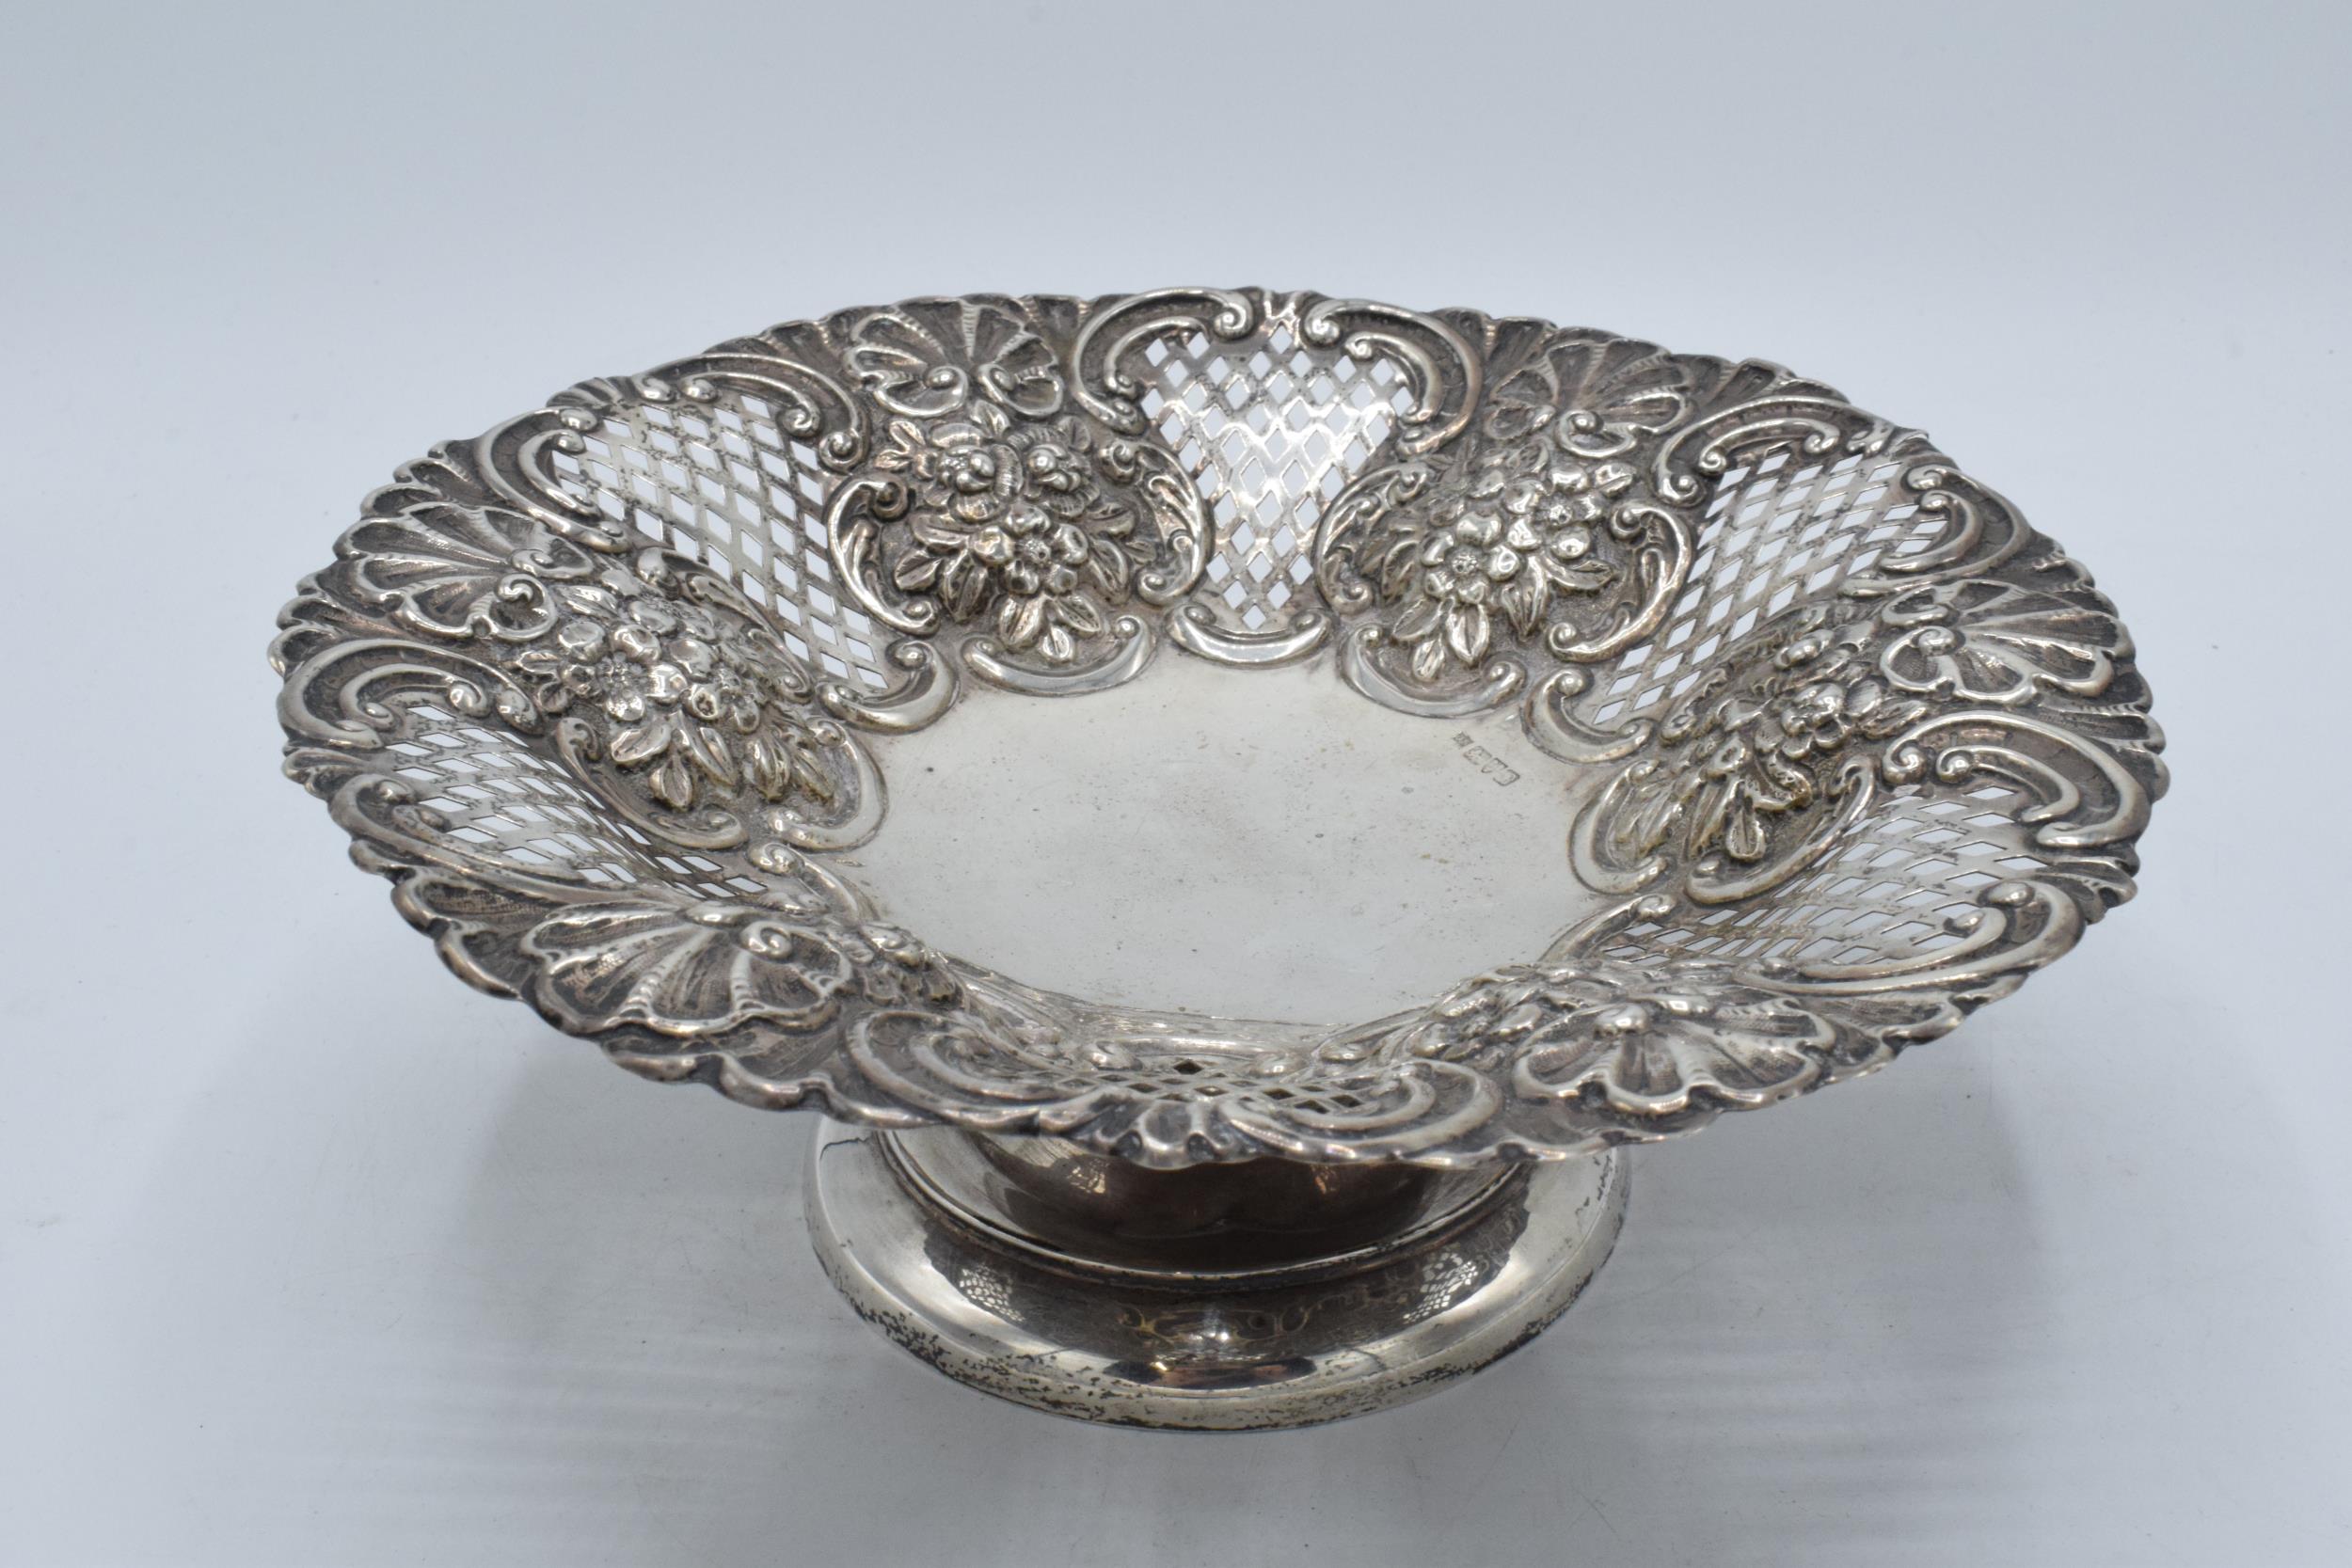 A silver pedestal dish with repousse decoration, Chester 1902, 272.2 grams. 23cm wide. - Image 4 of 4